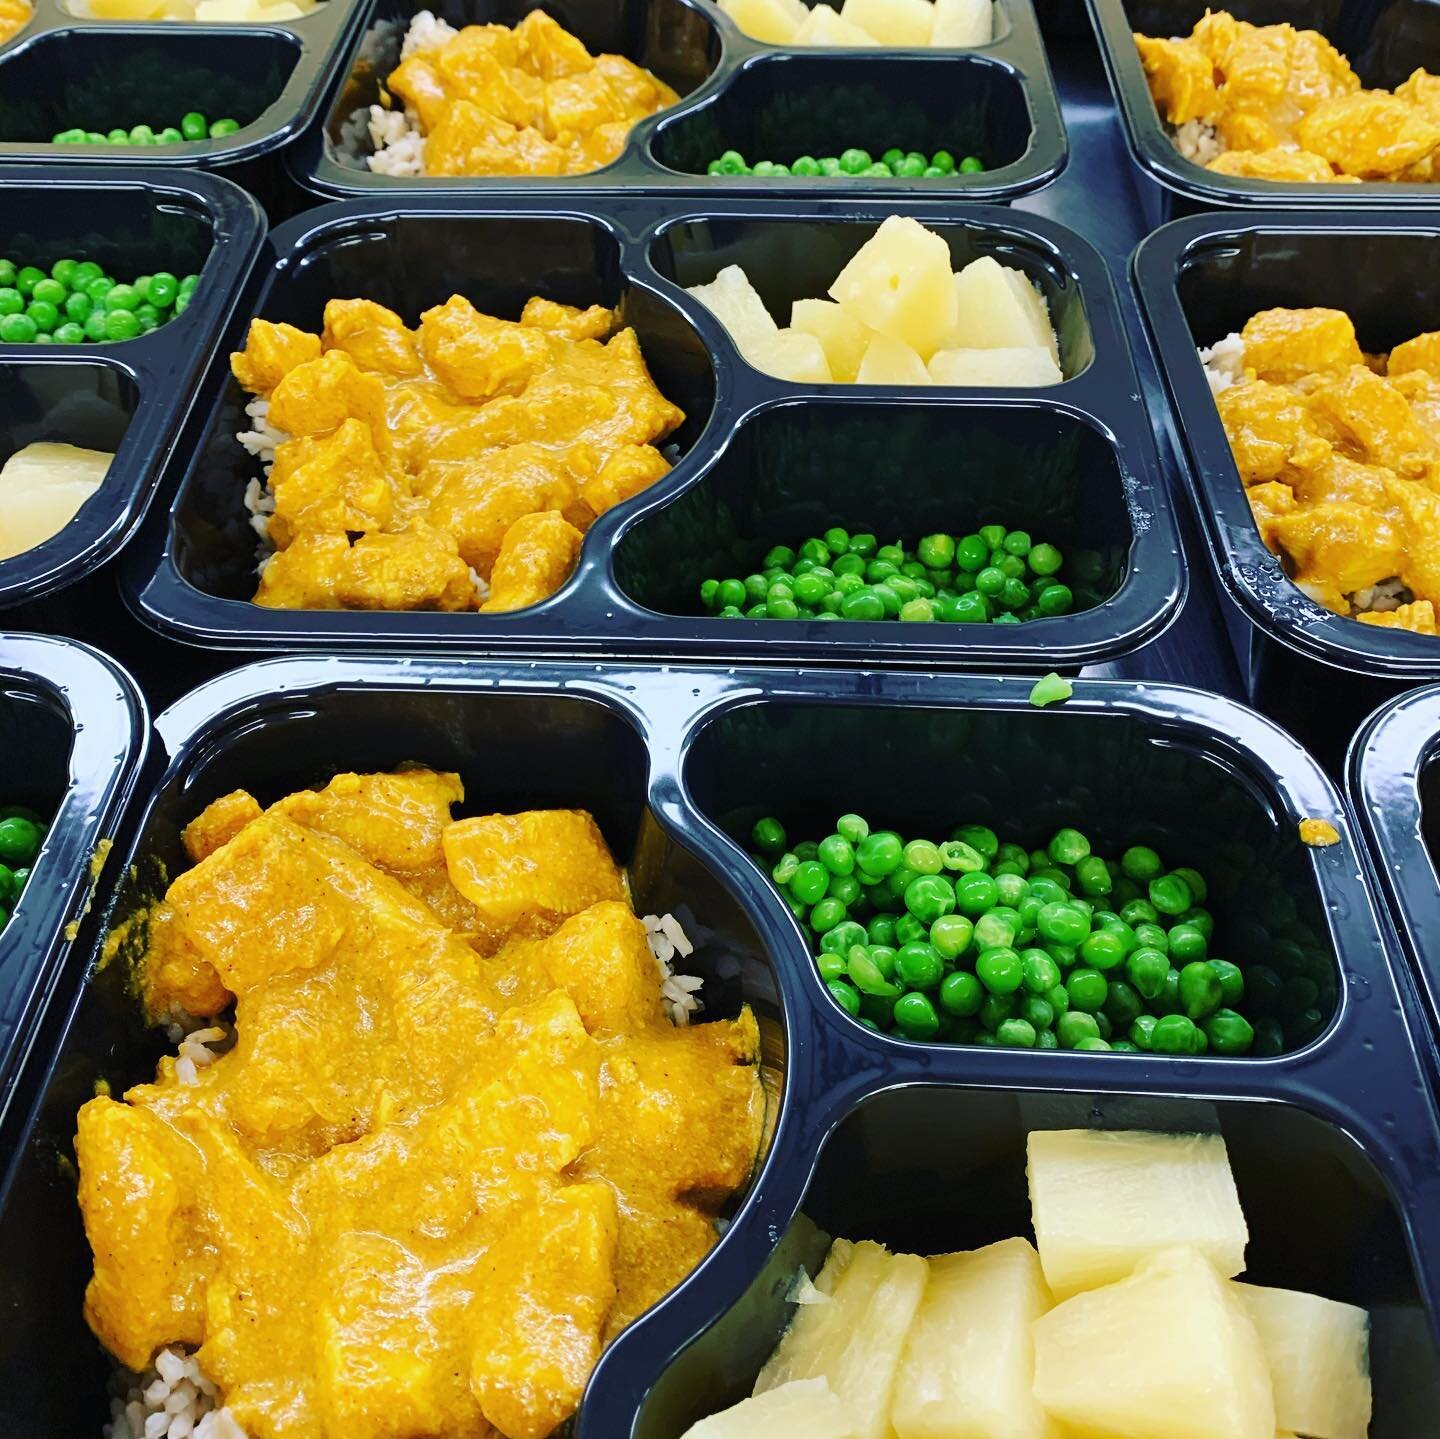 No April Fool&rsquo;s joke here @vtschoolmeals Fresh Chicken Tikka Masala heading your way for on campus and curbside pick up lunch today #healthyschoolmeals #fromscratch #scratchcooking #vtschoolmeals #tikkamasala